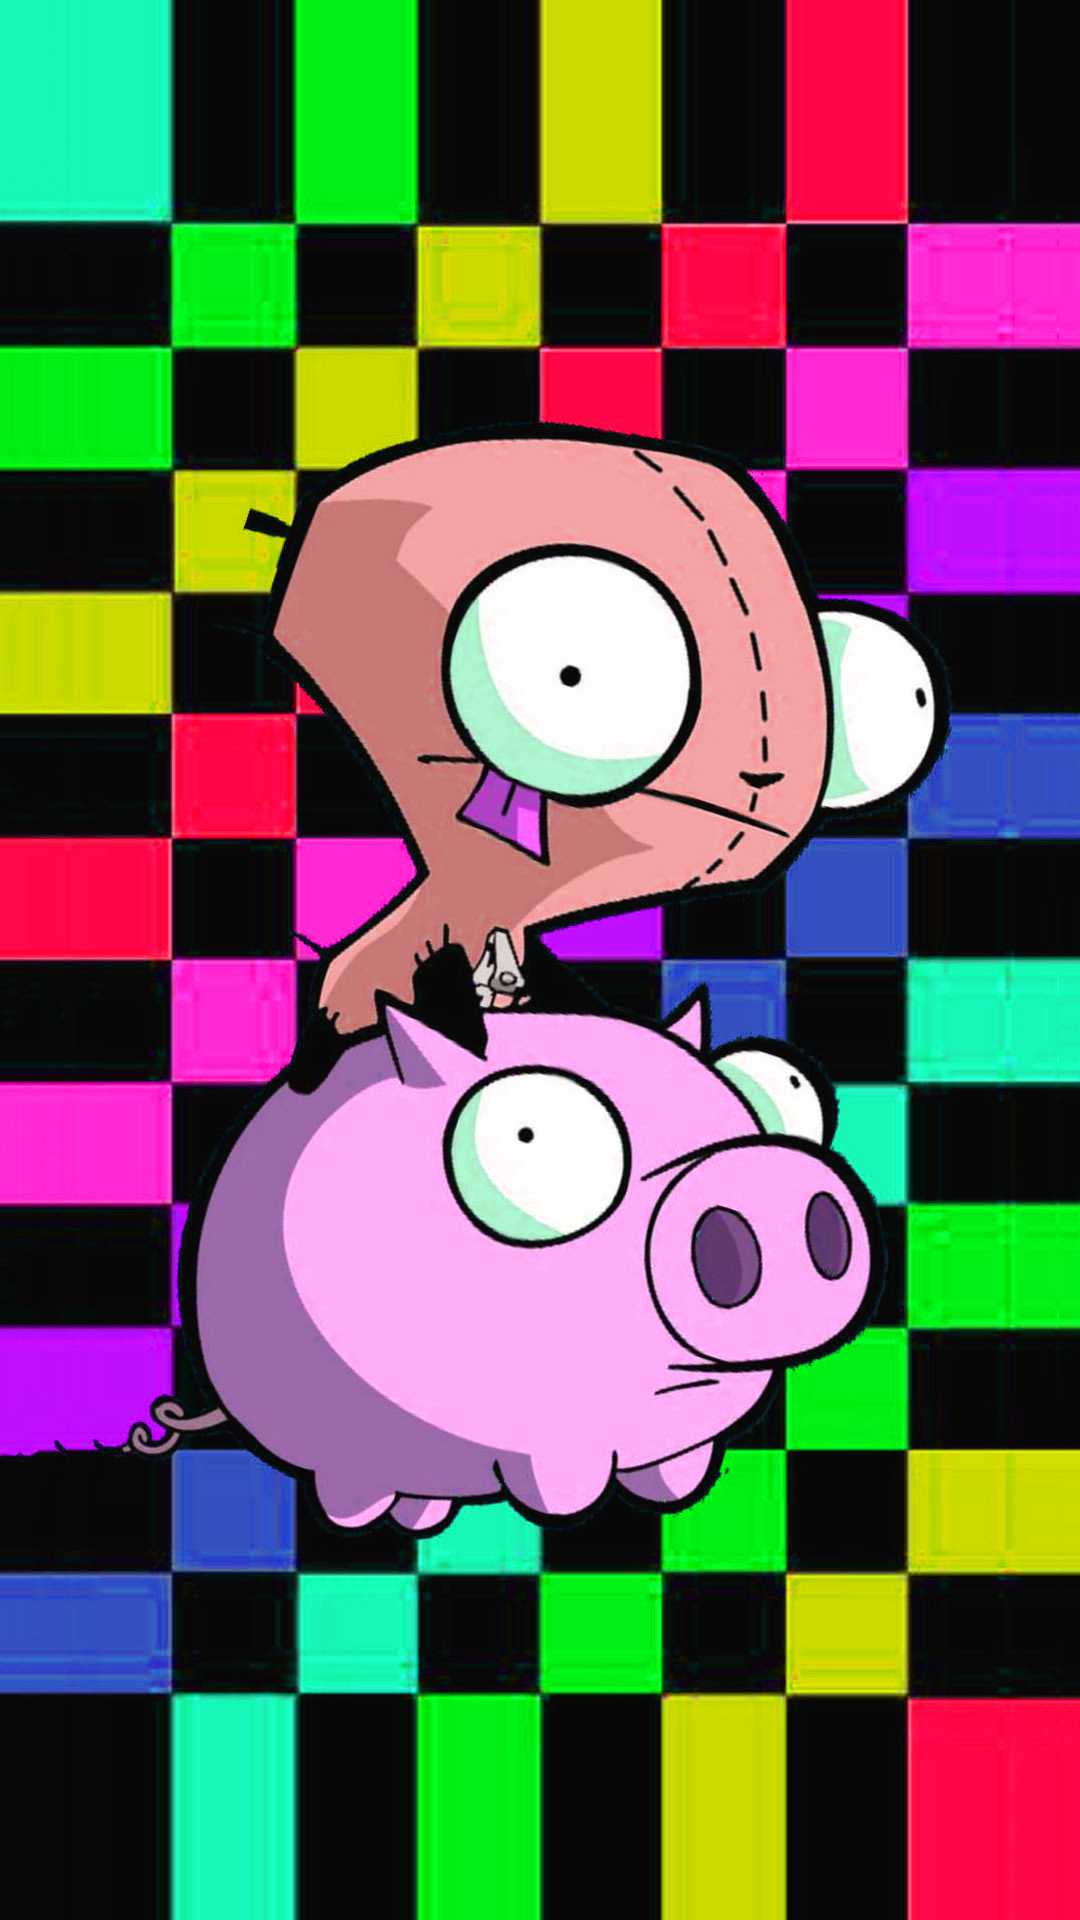 IPhone wallpaper with cartoon characters from the show Invader Zim. - Weirdcore